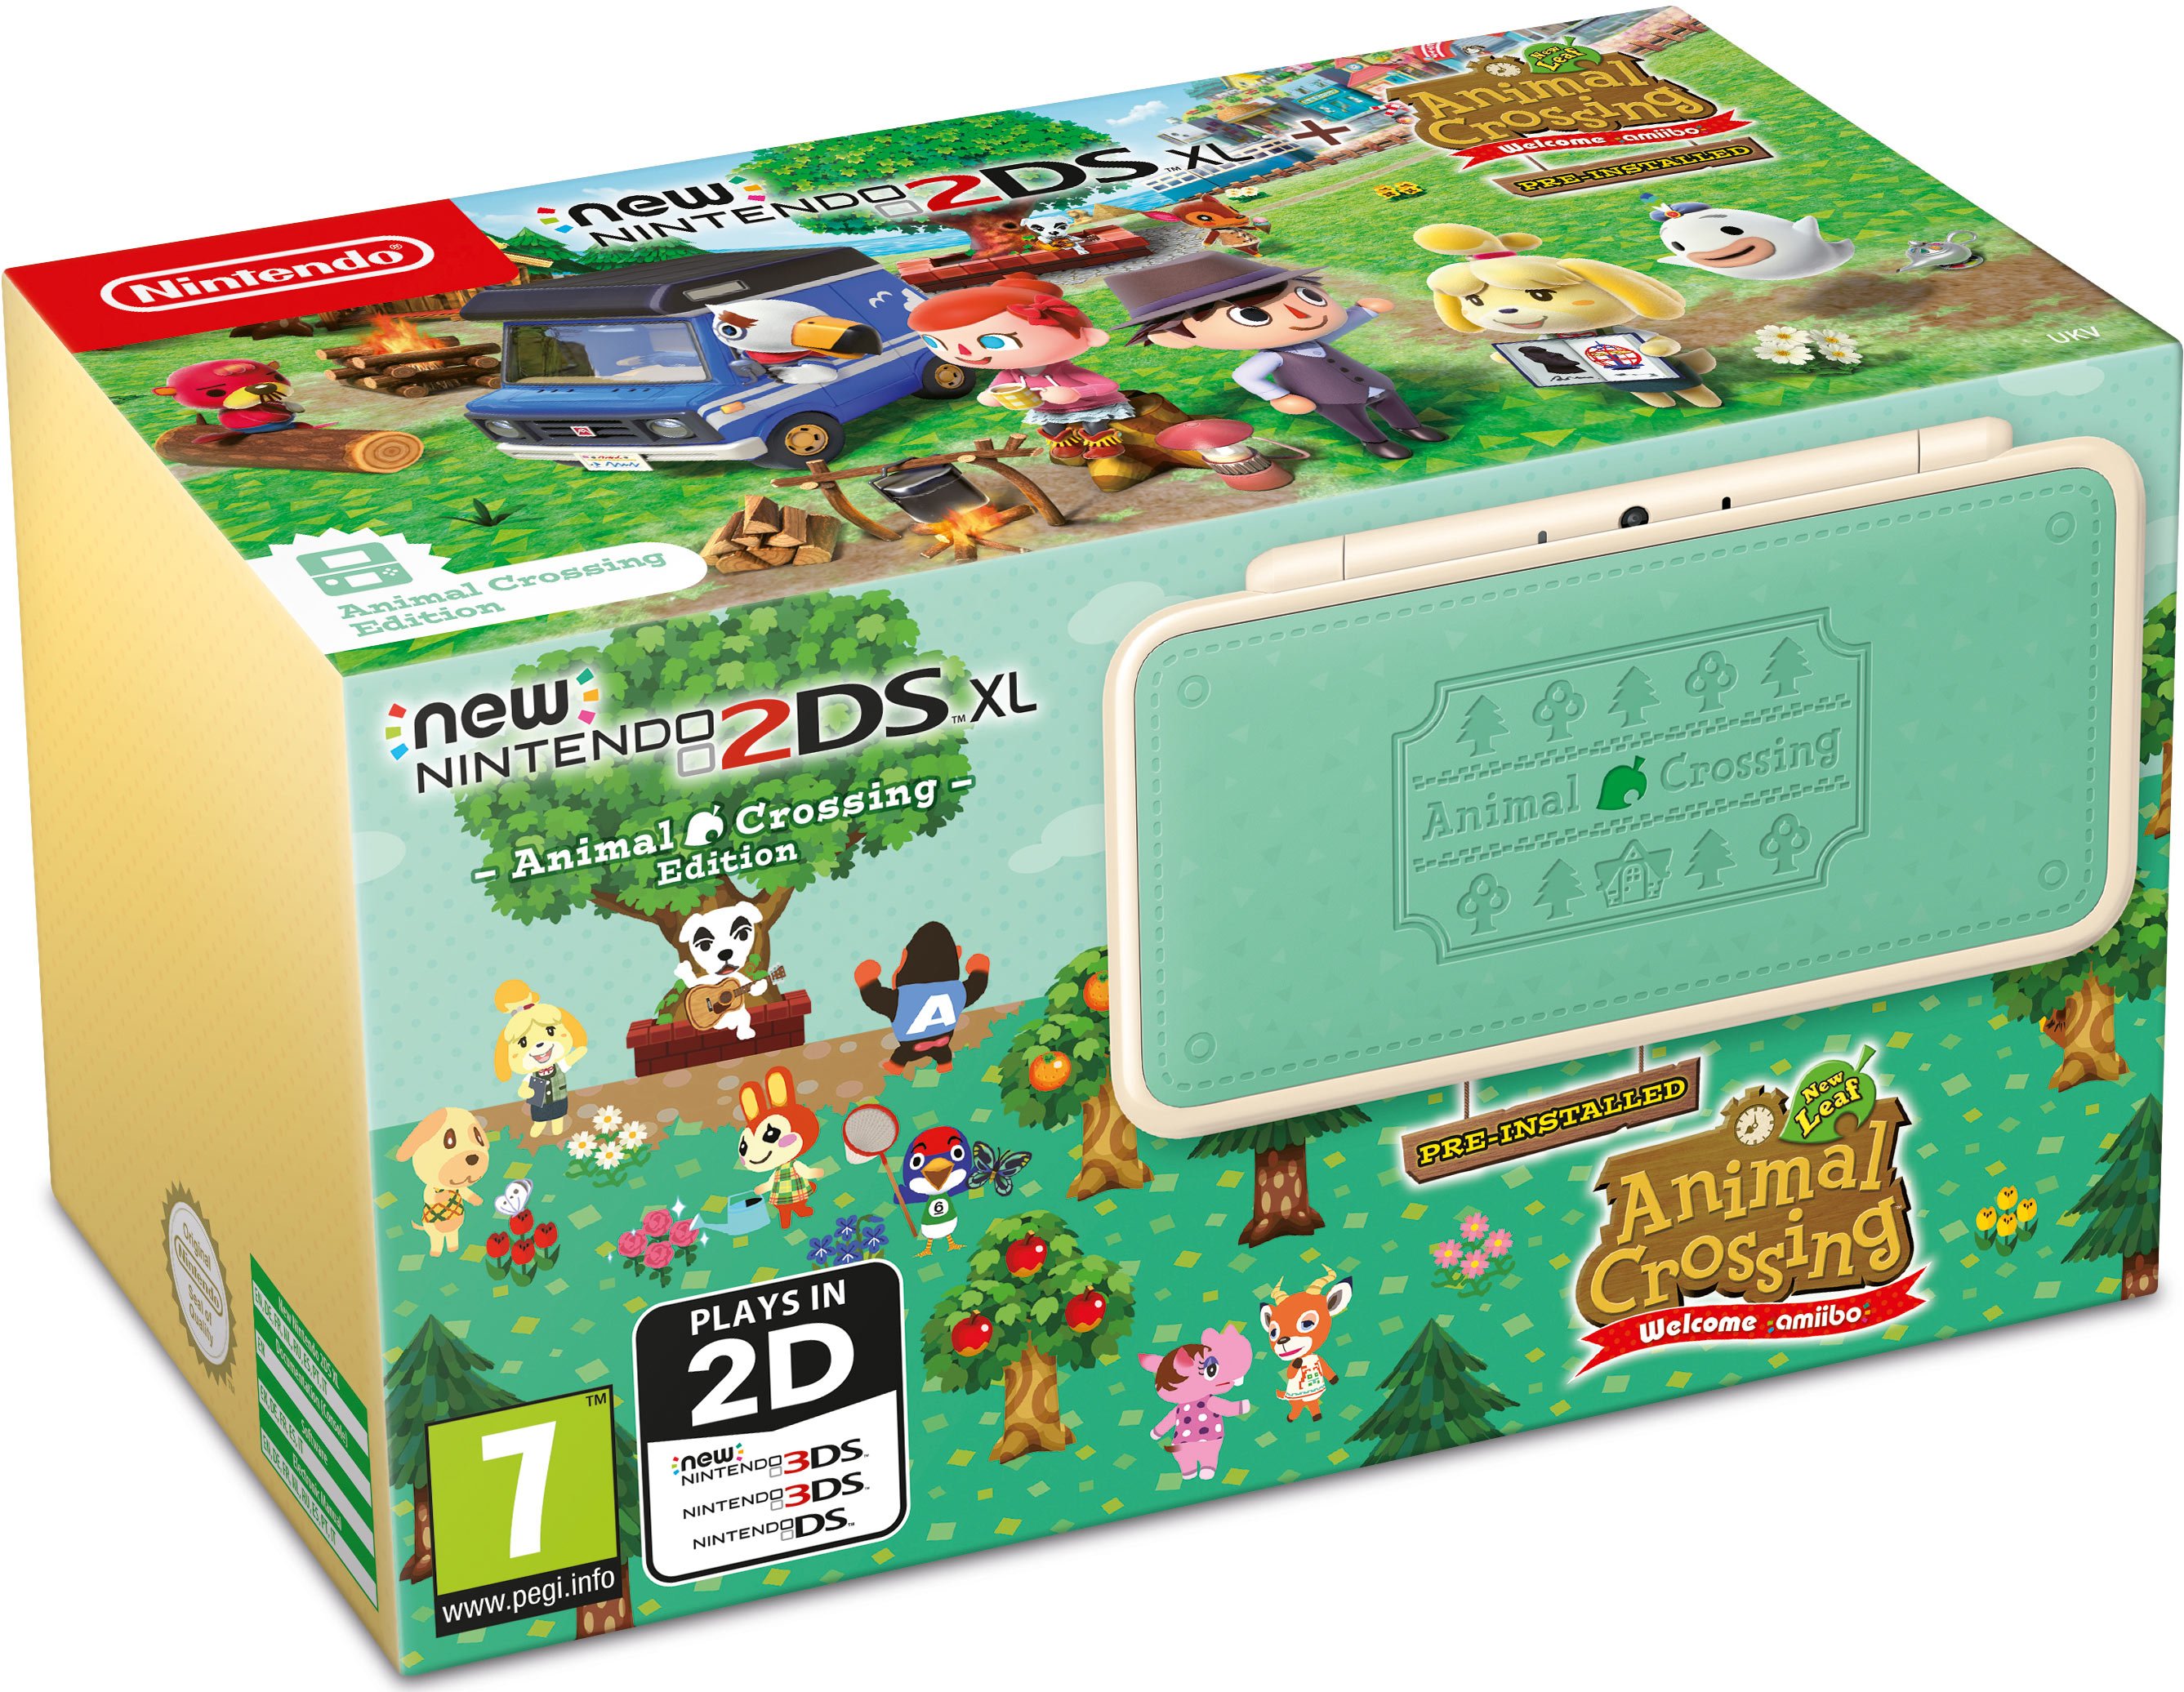 Buy ​New Nintendo 2DS XL Animal Crossing Edition (Animal Crossing New Leaf  Pre-Installed)​